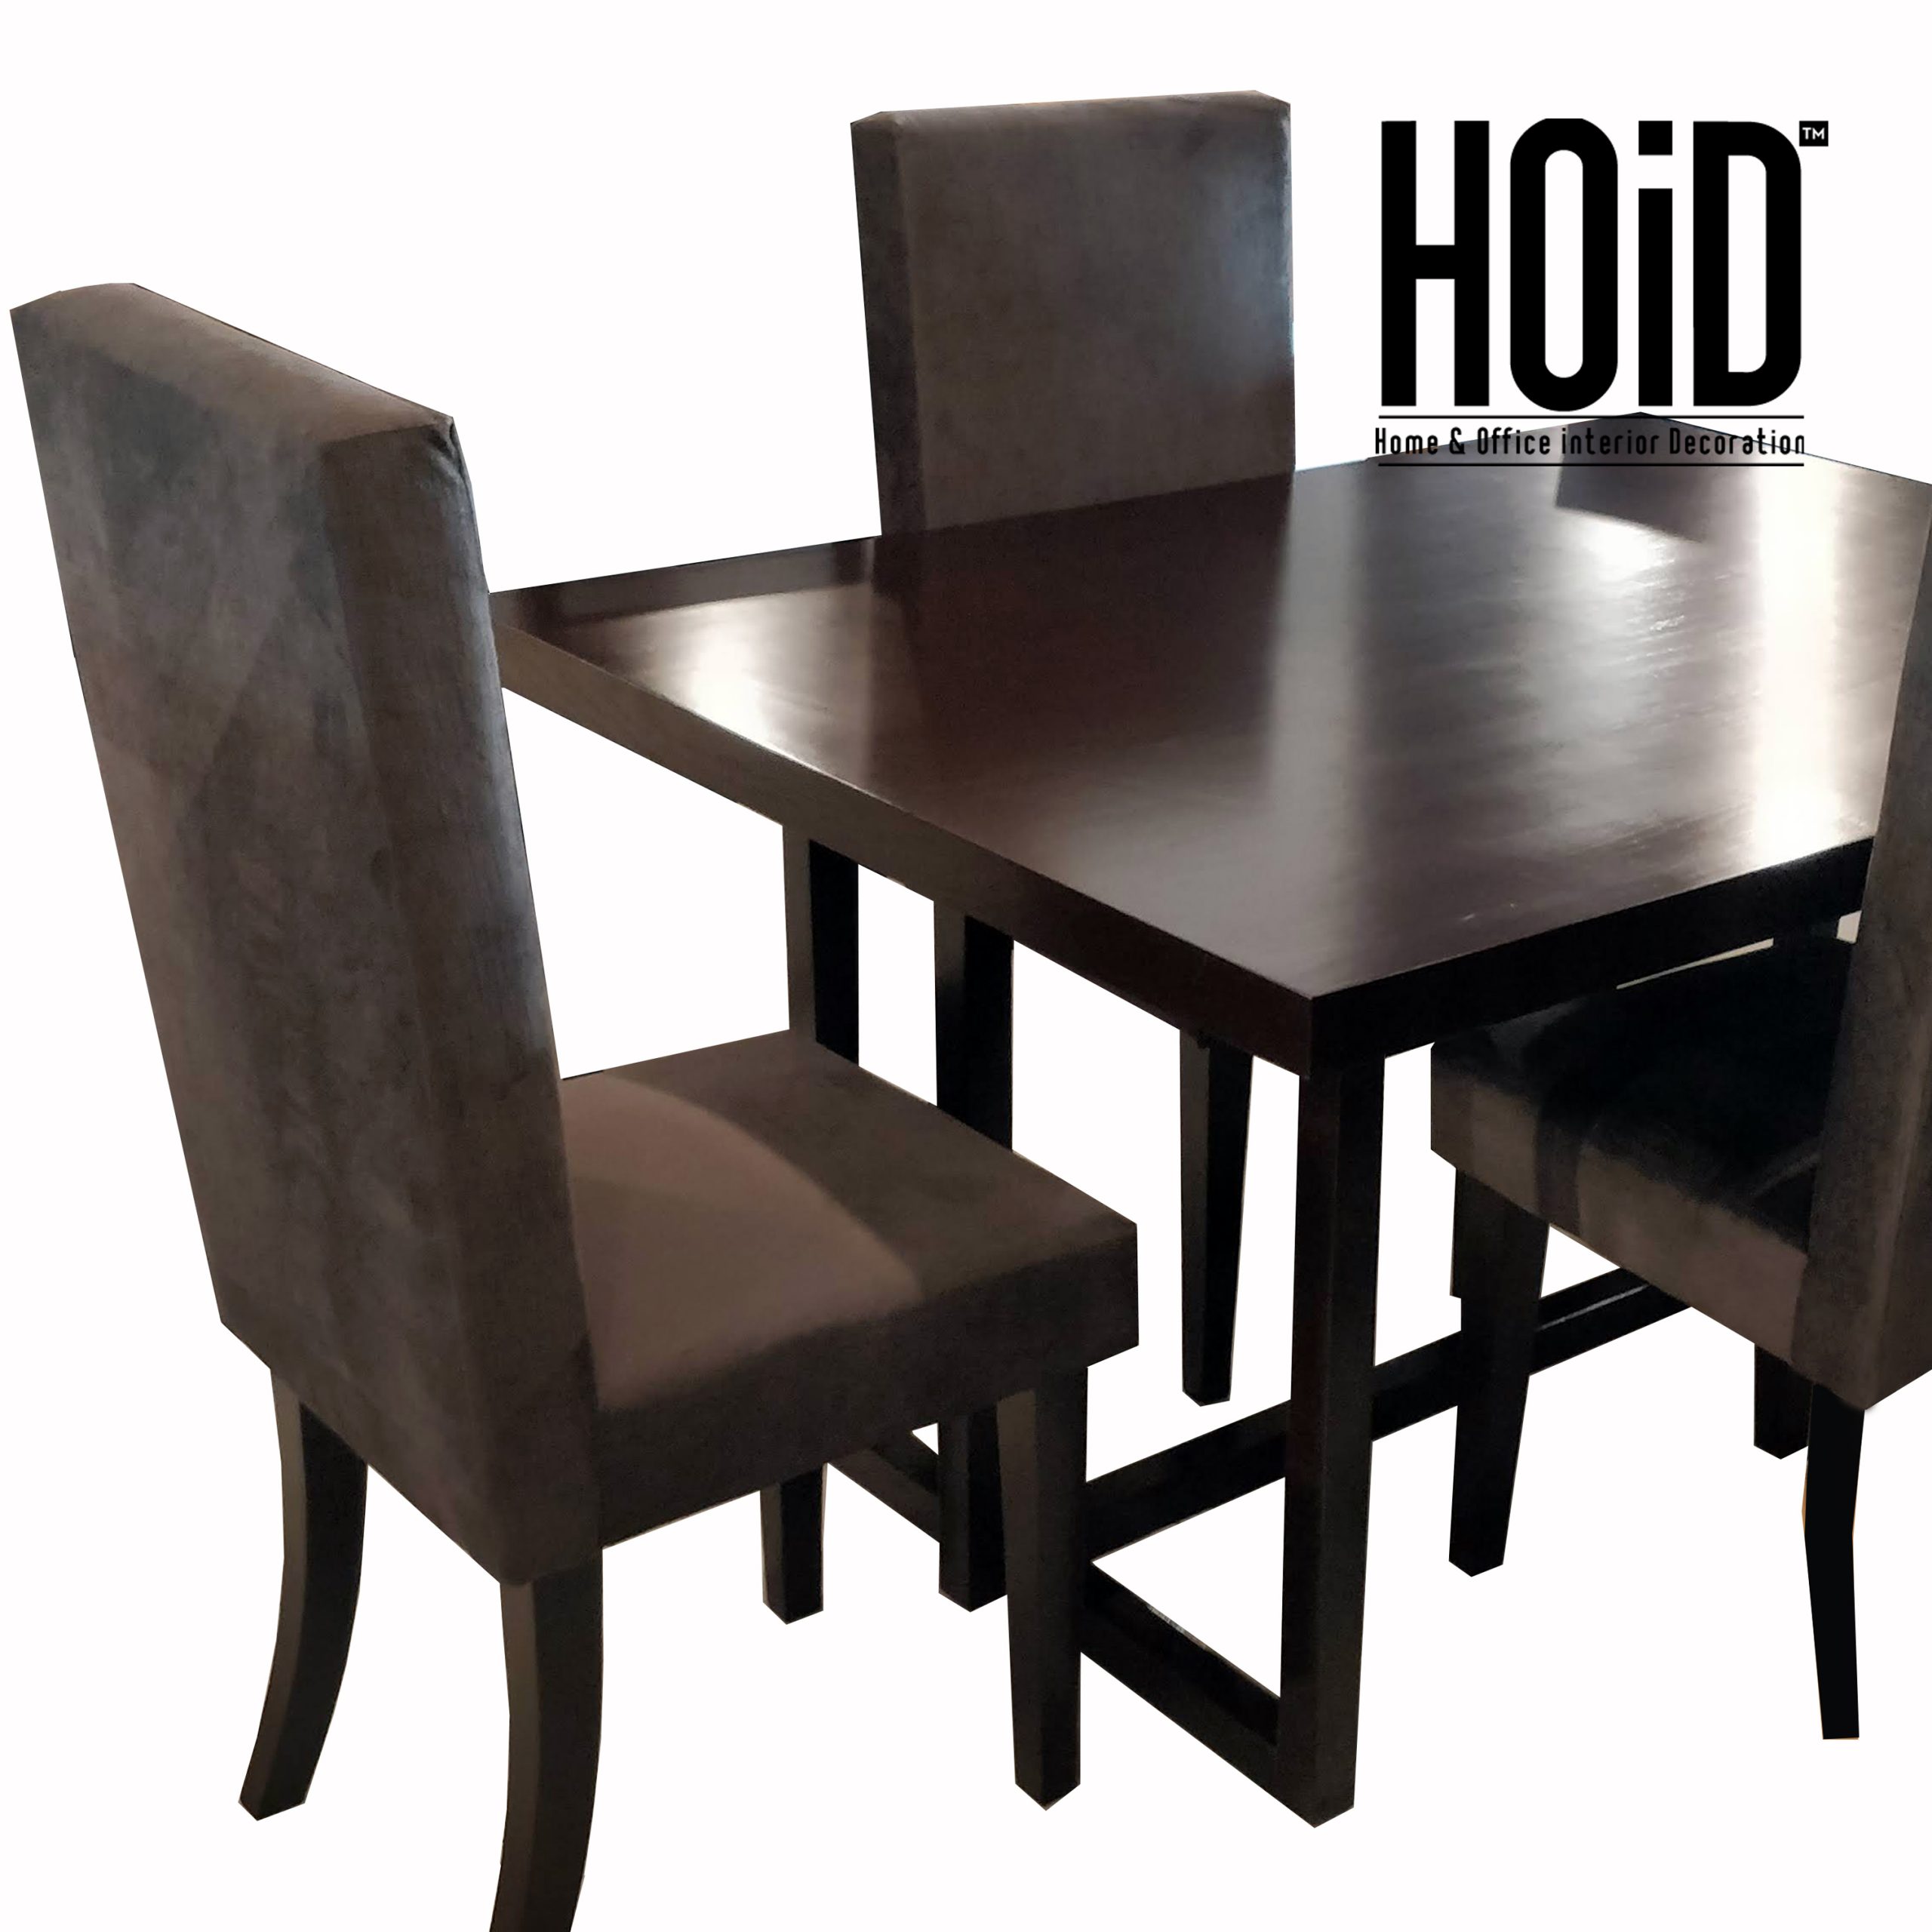 Mit Dining Table With 4 Chairs Hoid Pk, Black Kitchen Table And 4 Chairs